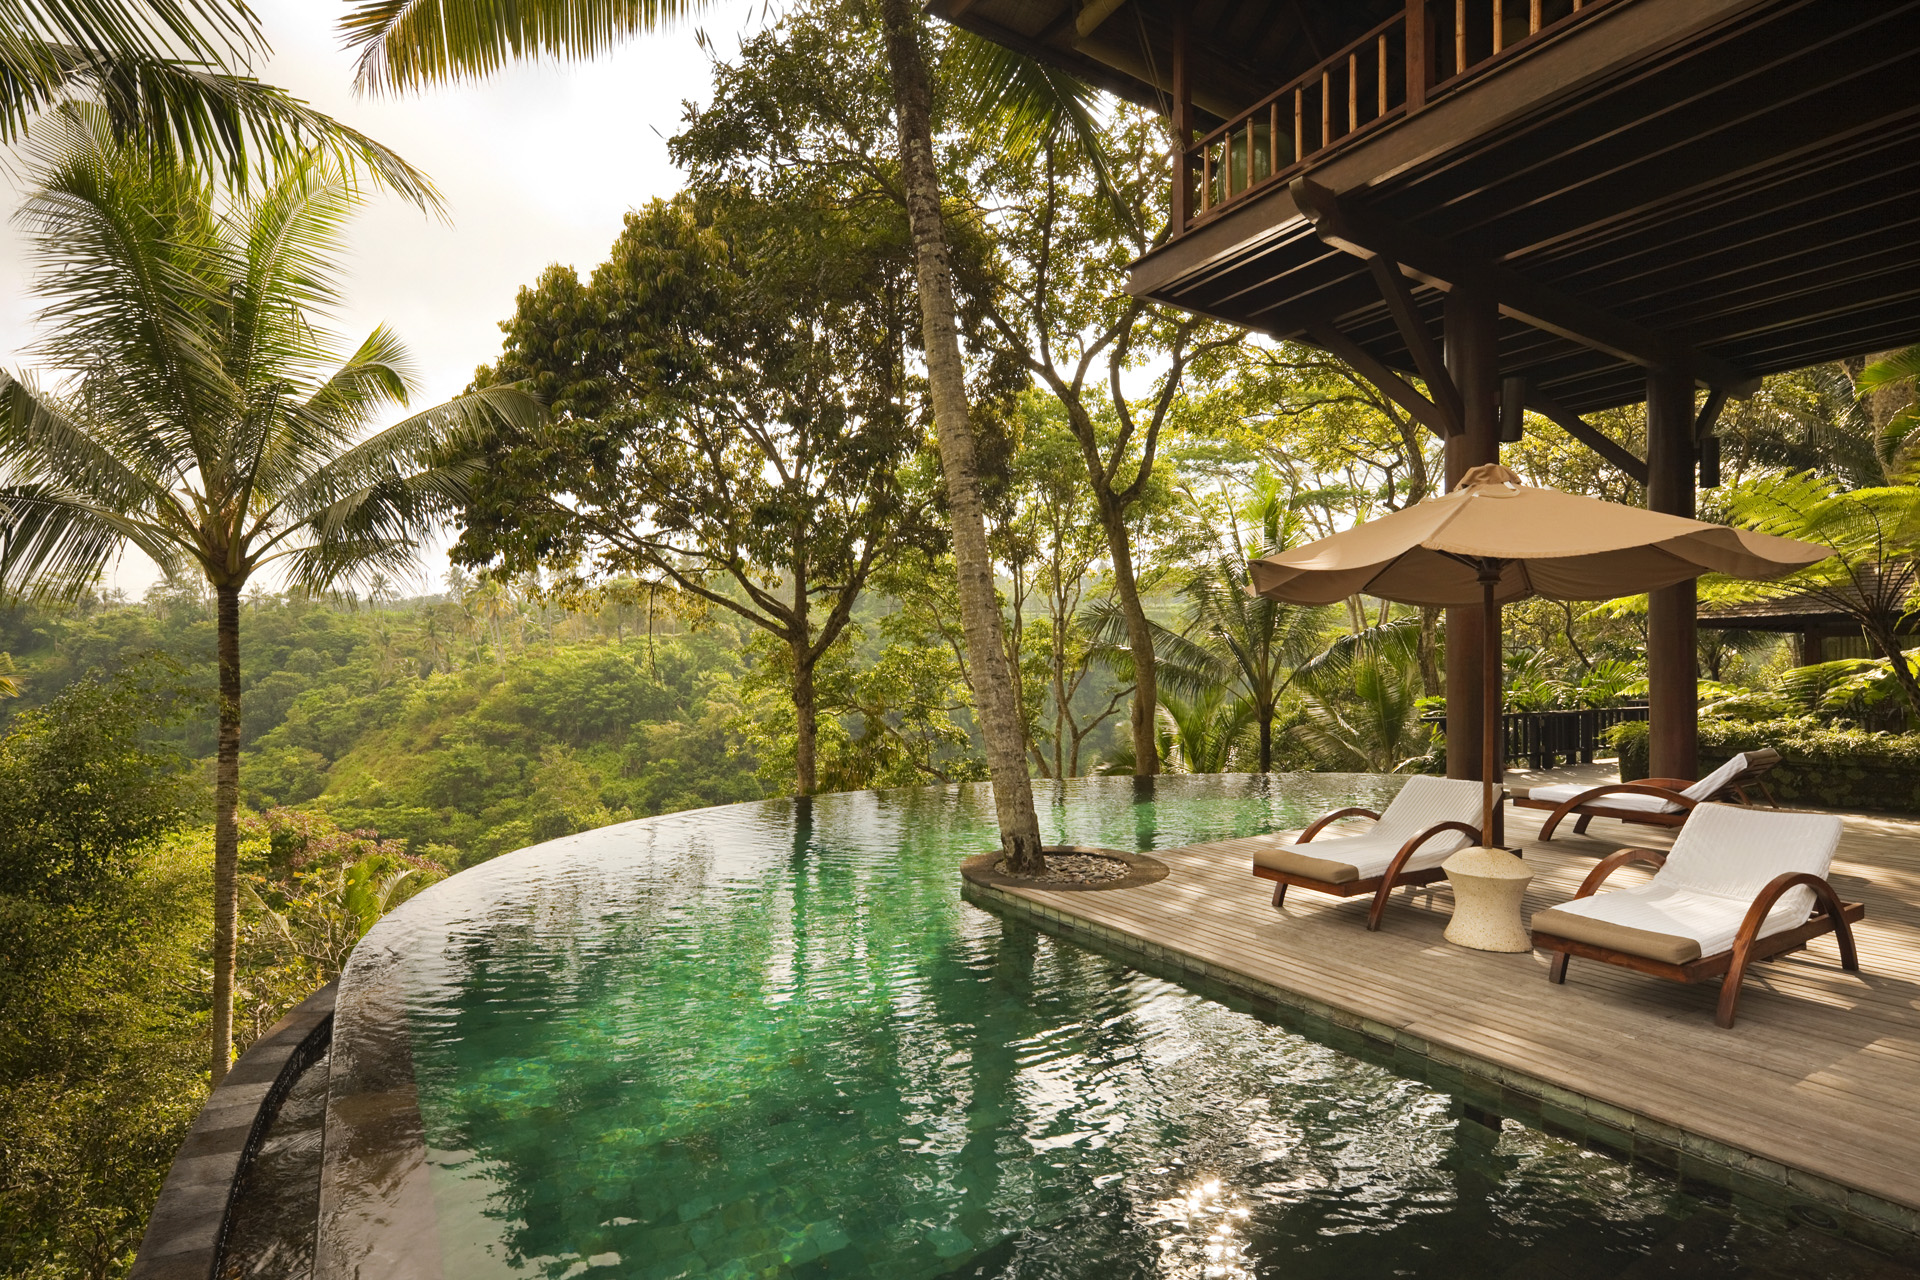 An infinity pool overlooking verdant forest with deck chairs and parasol